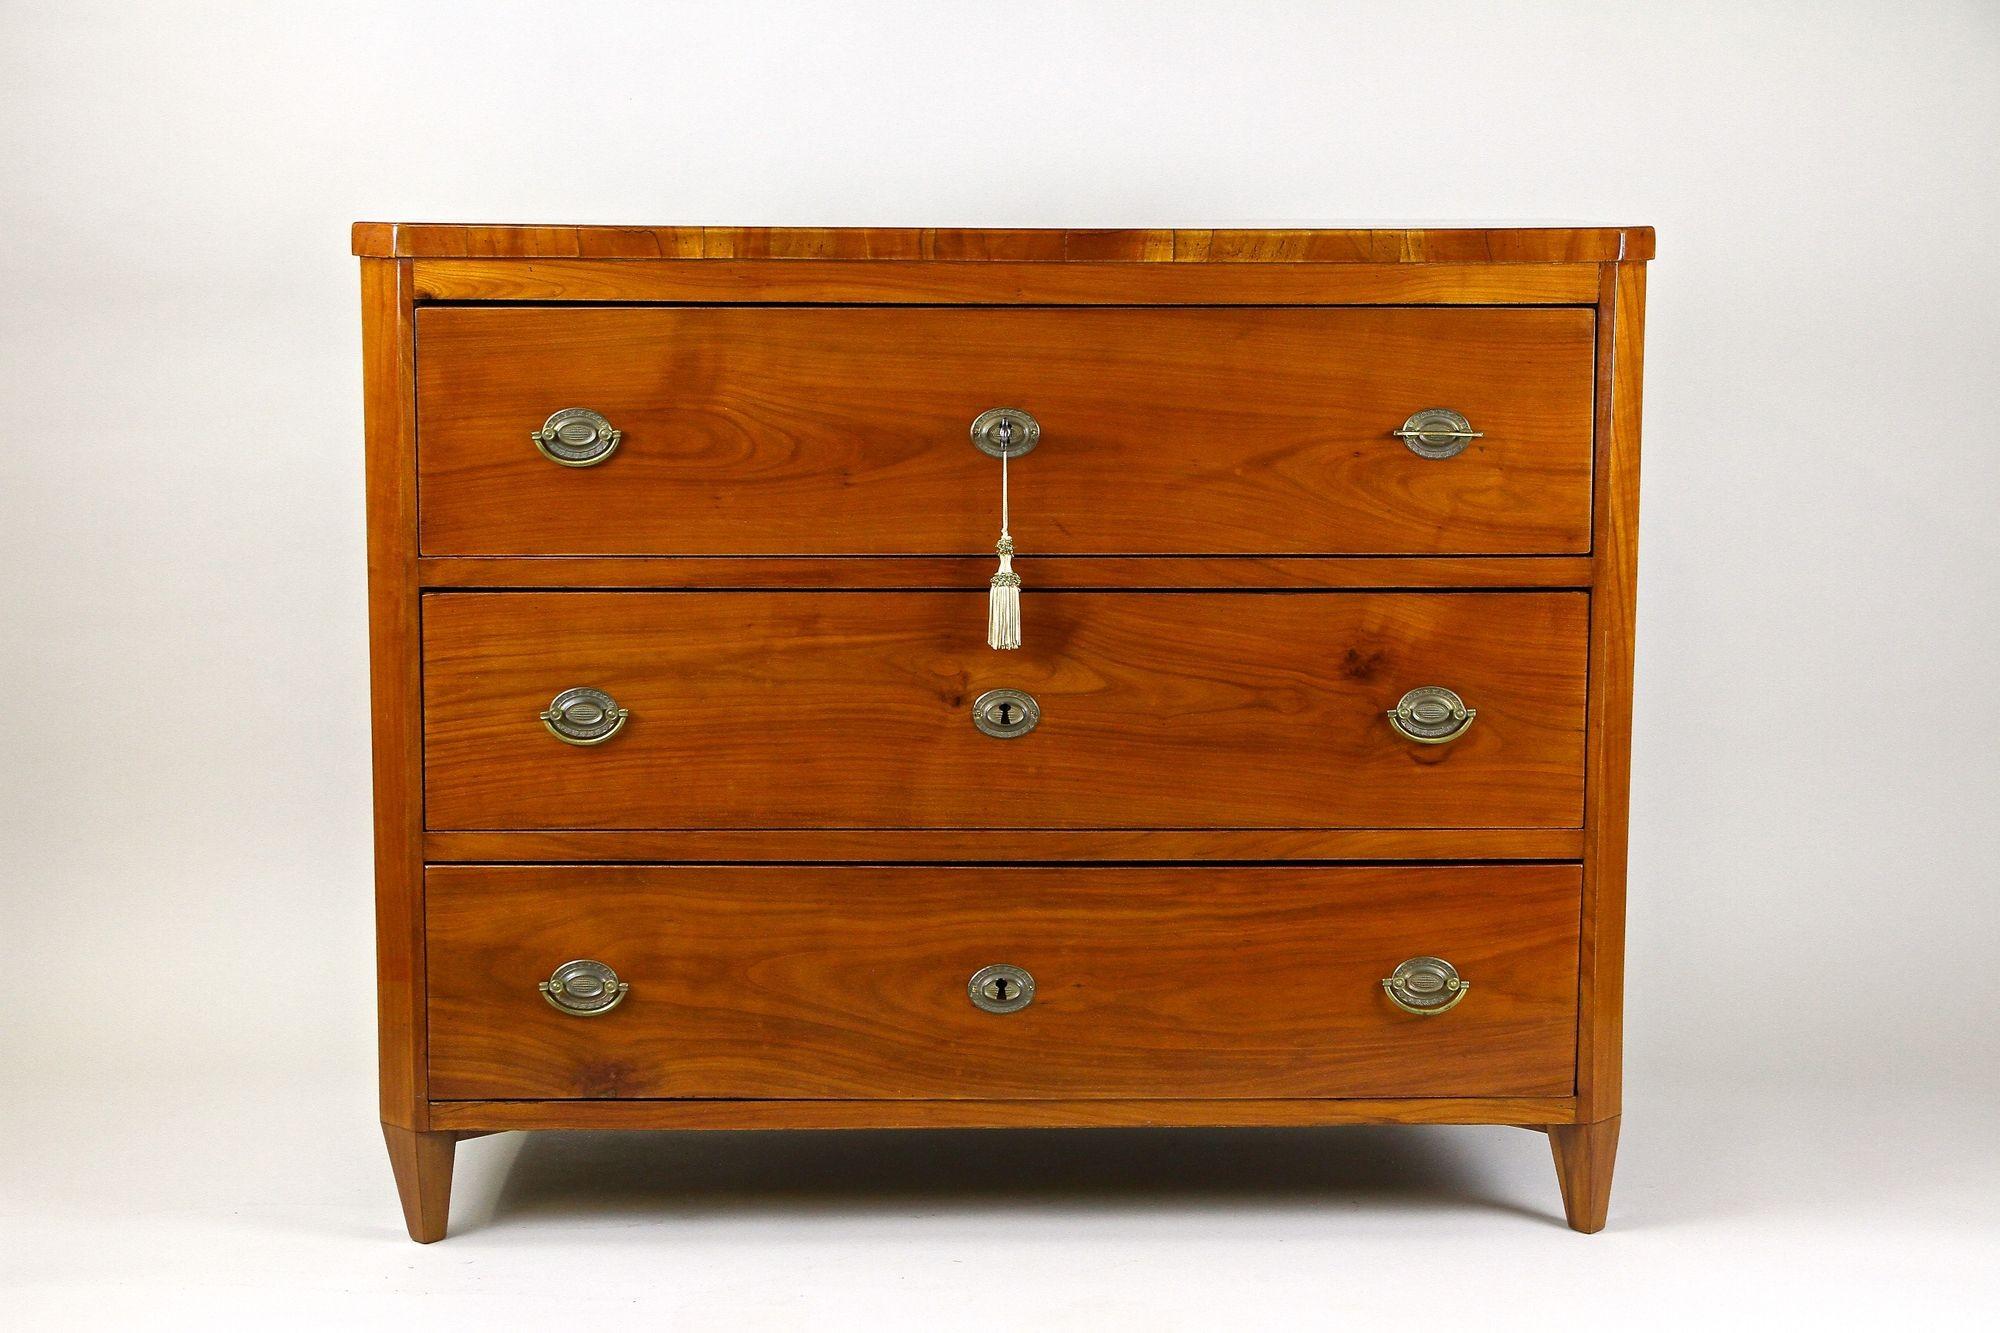 Fantastic looking 19th century cherrywood chest of drawers from the early Biedermeier period around 1830 in Austria. This newly restored antique three drawer Biedermeier commode impresses with its straight shaped lines and a beautiful cherrywood